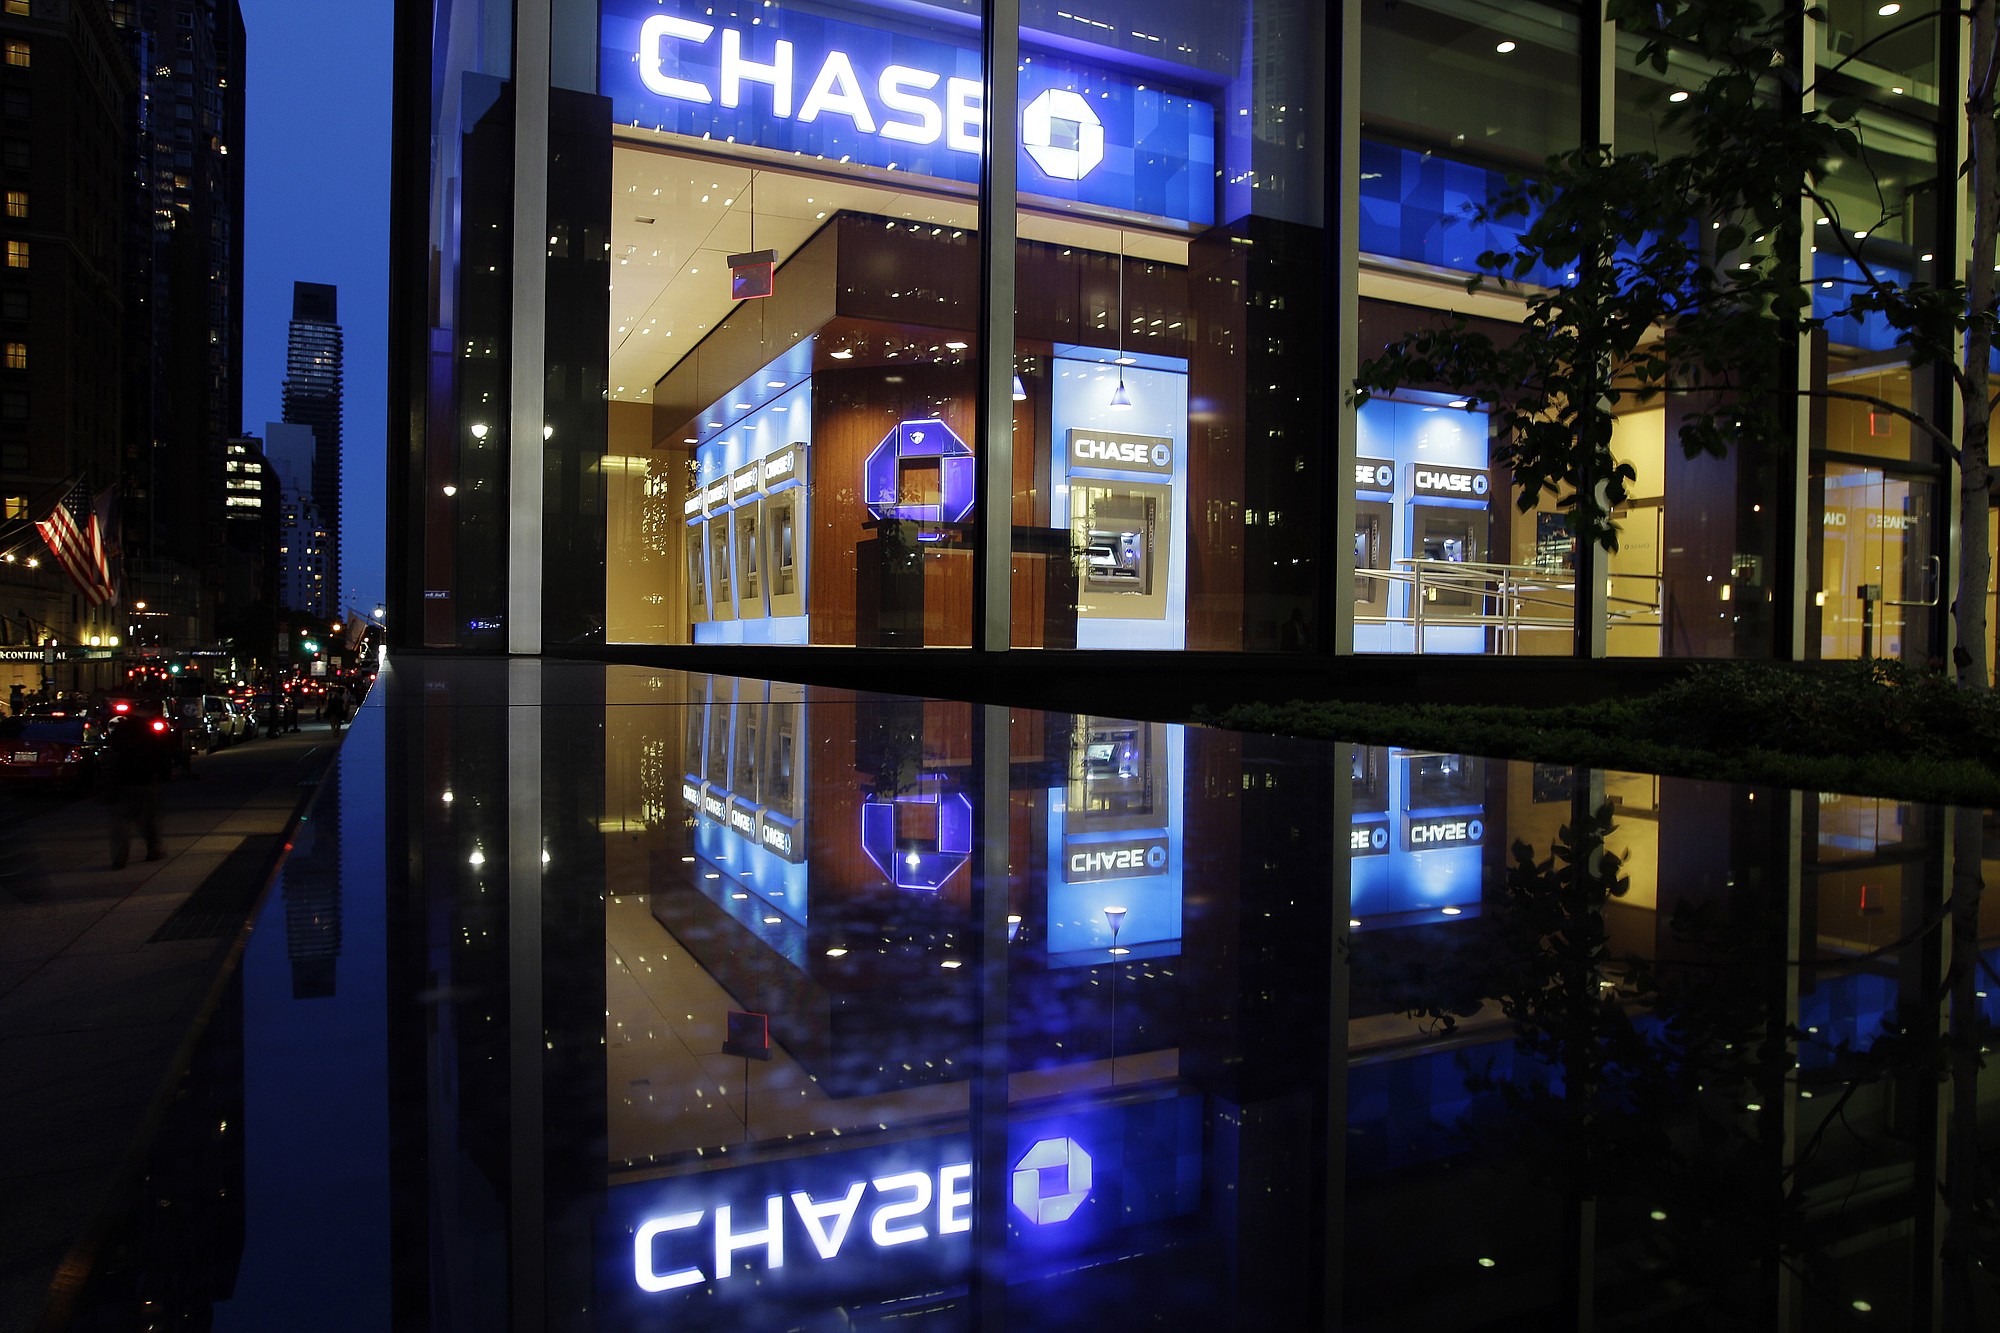 Cars pass a JP Morgan Chase building in New York.